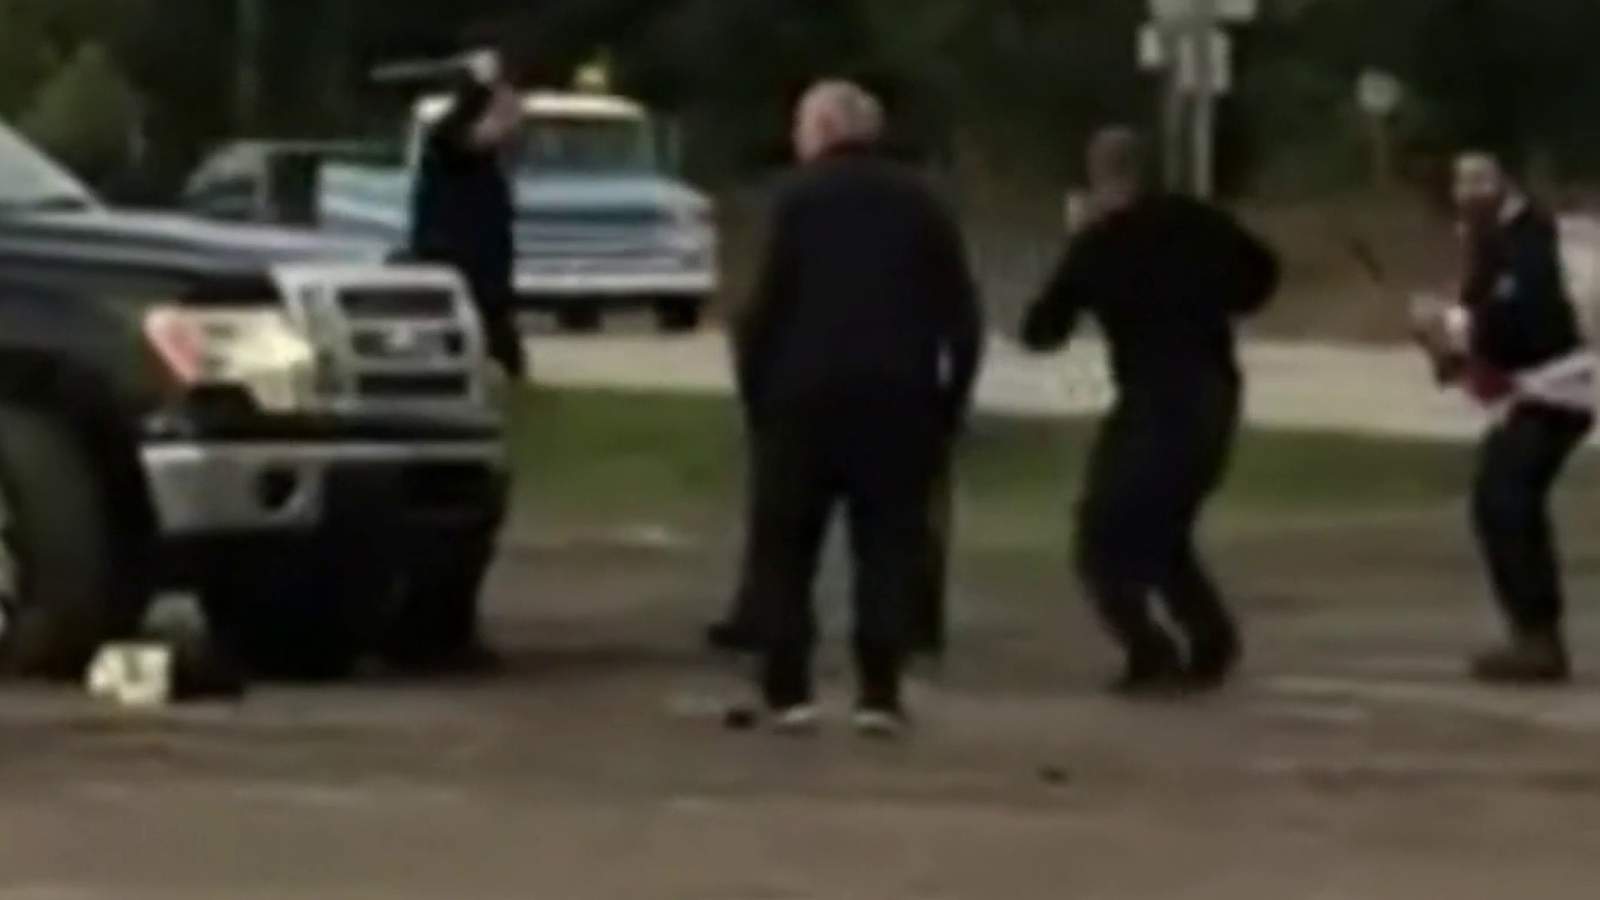 Video captures parking lot fight in Bruce Township